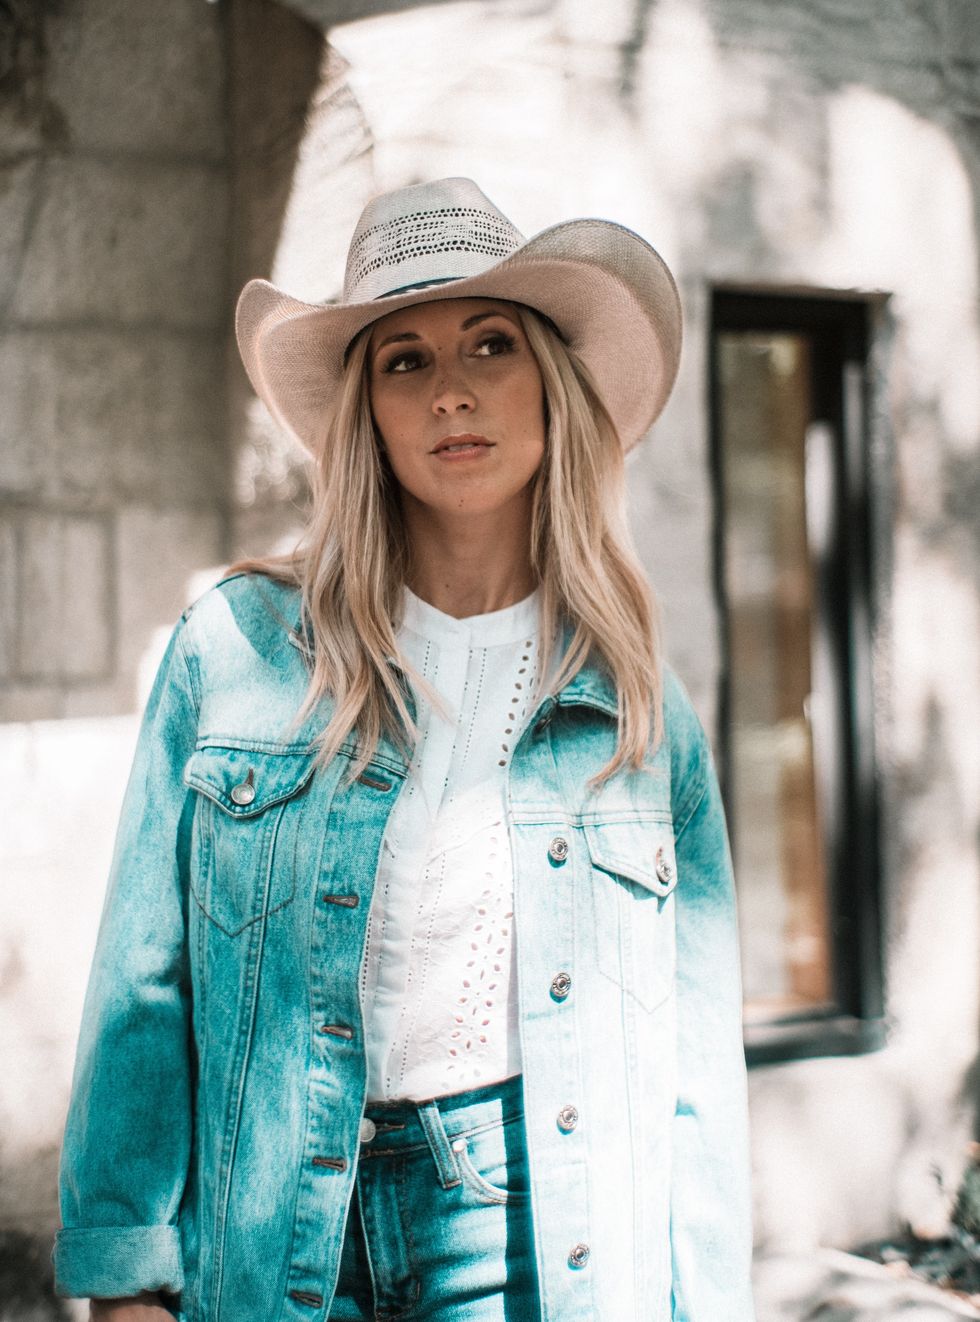 11 Songs To Add To Your 'Heart Of Country' Playlist ASAP, Because 2020 Could Use Some Country